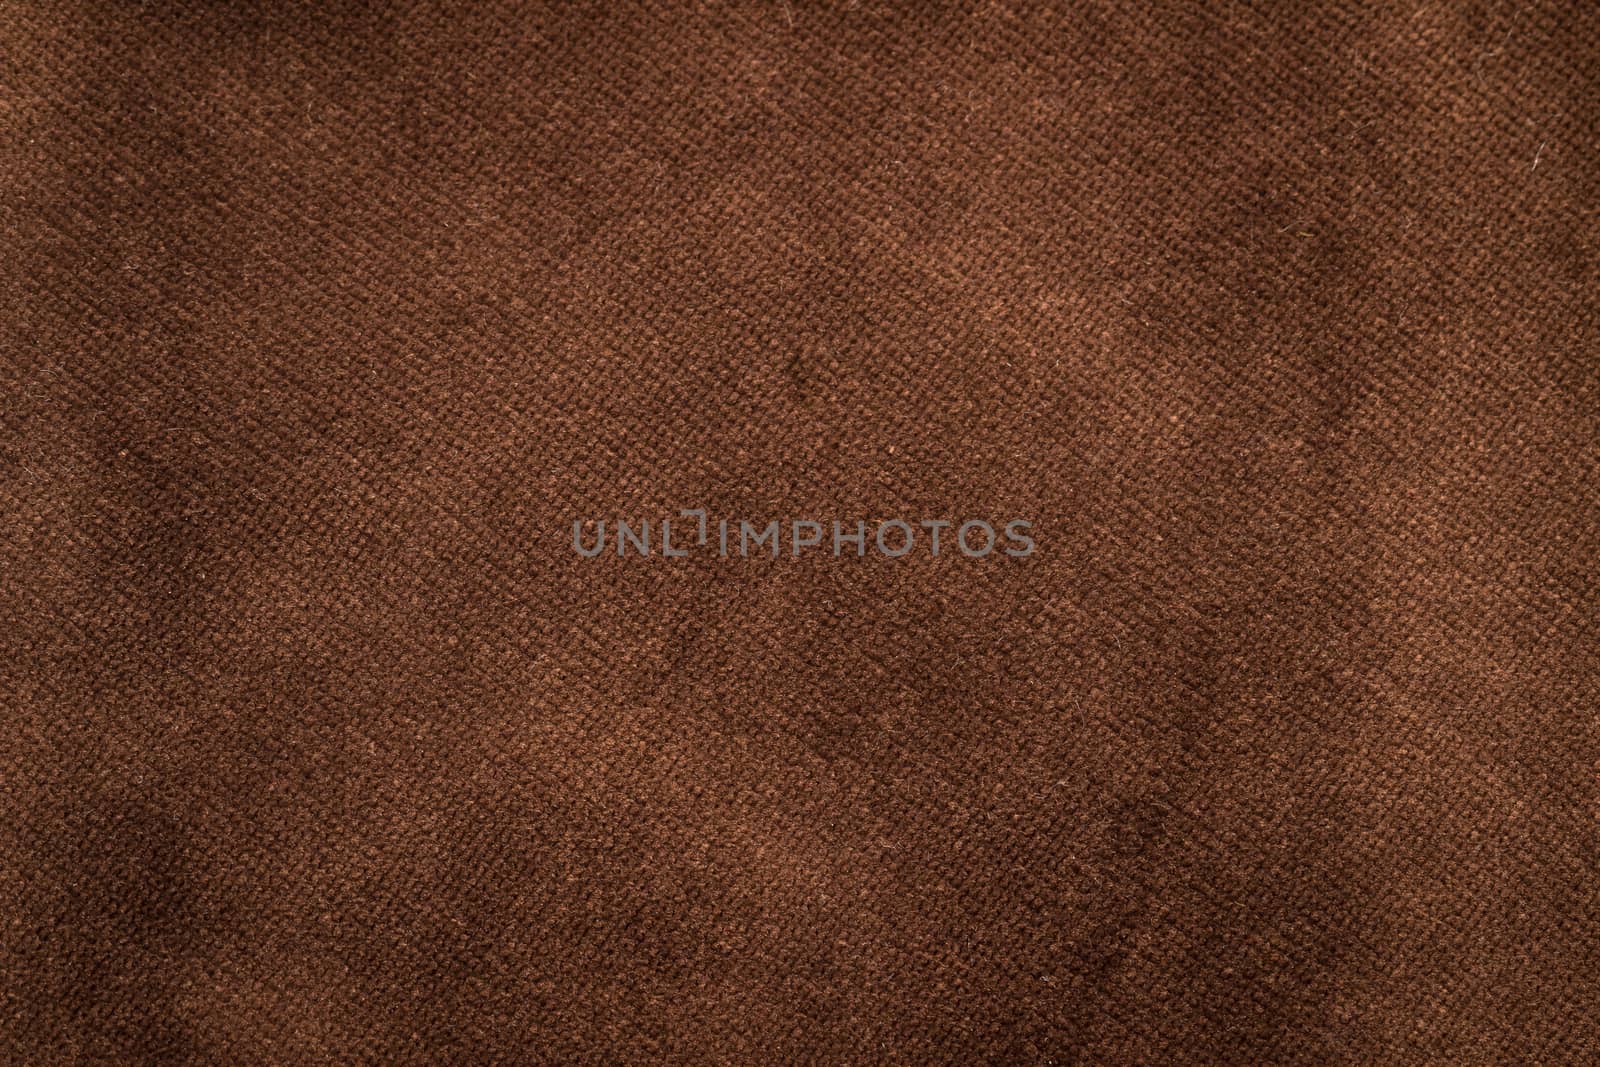 The Velvet fabric texture in brown color.